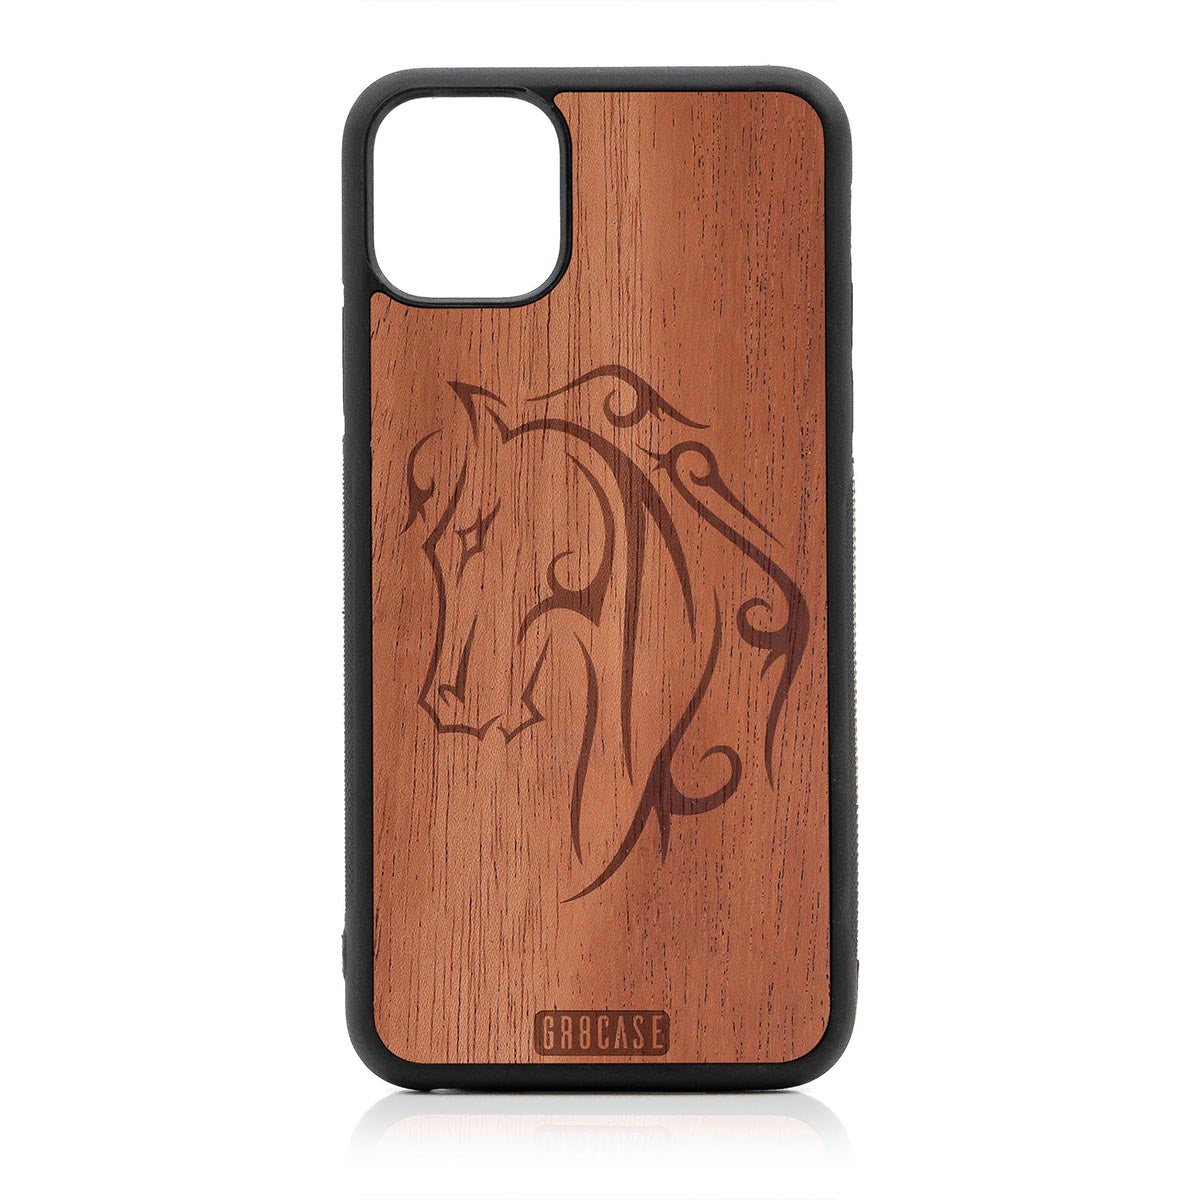 Horse Tattoo Design Wood Case For iPhone 11 Pro Max by GR8CASE